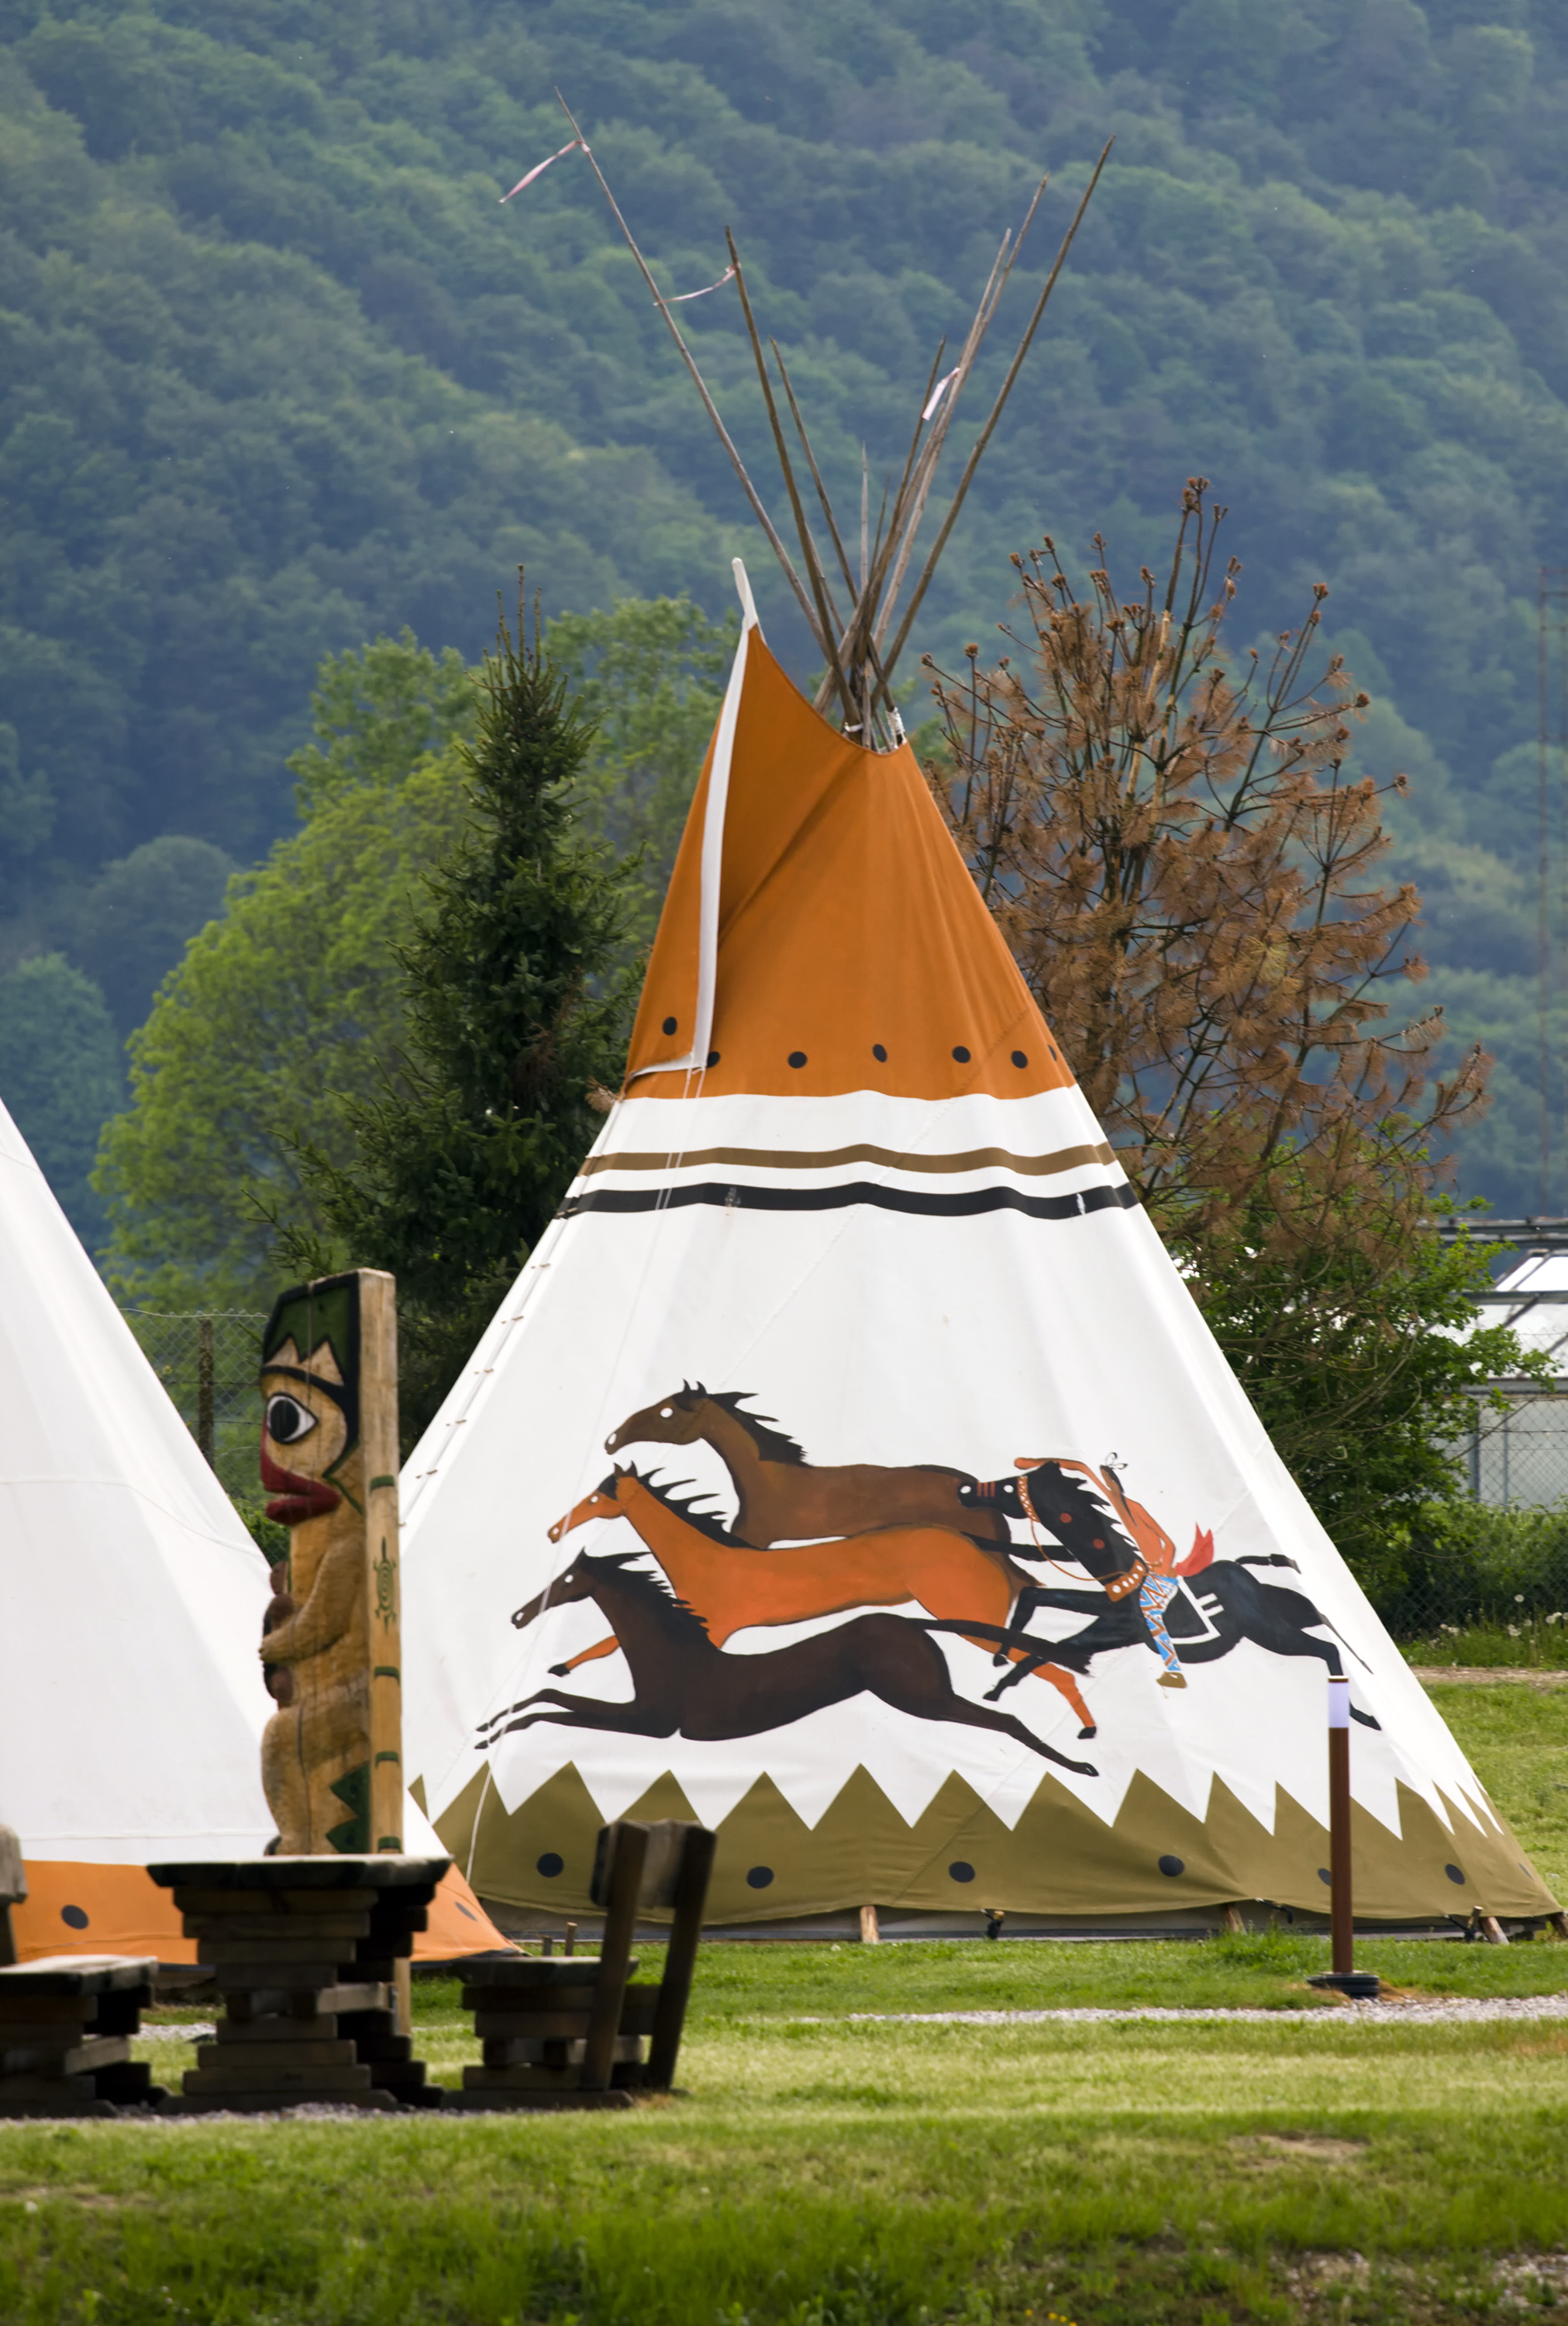 Tipi Pics, Man Made Collection - First Nation Tipi Designs - HD Wallpaper 